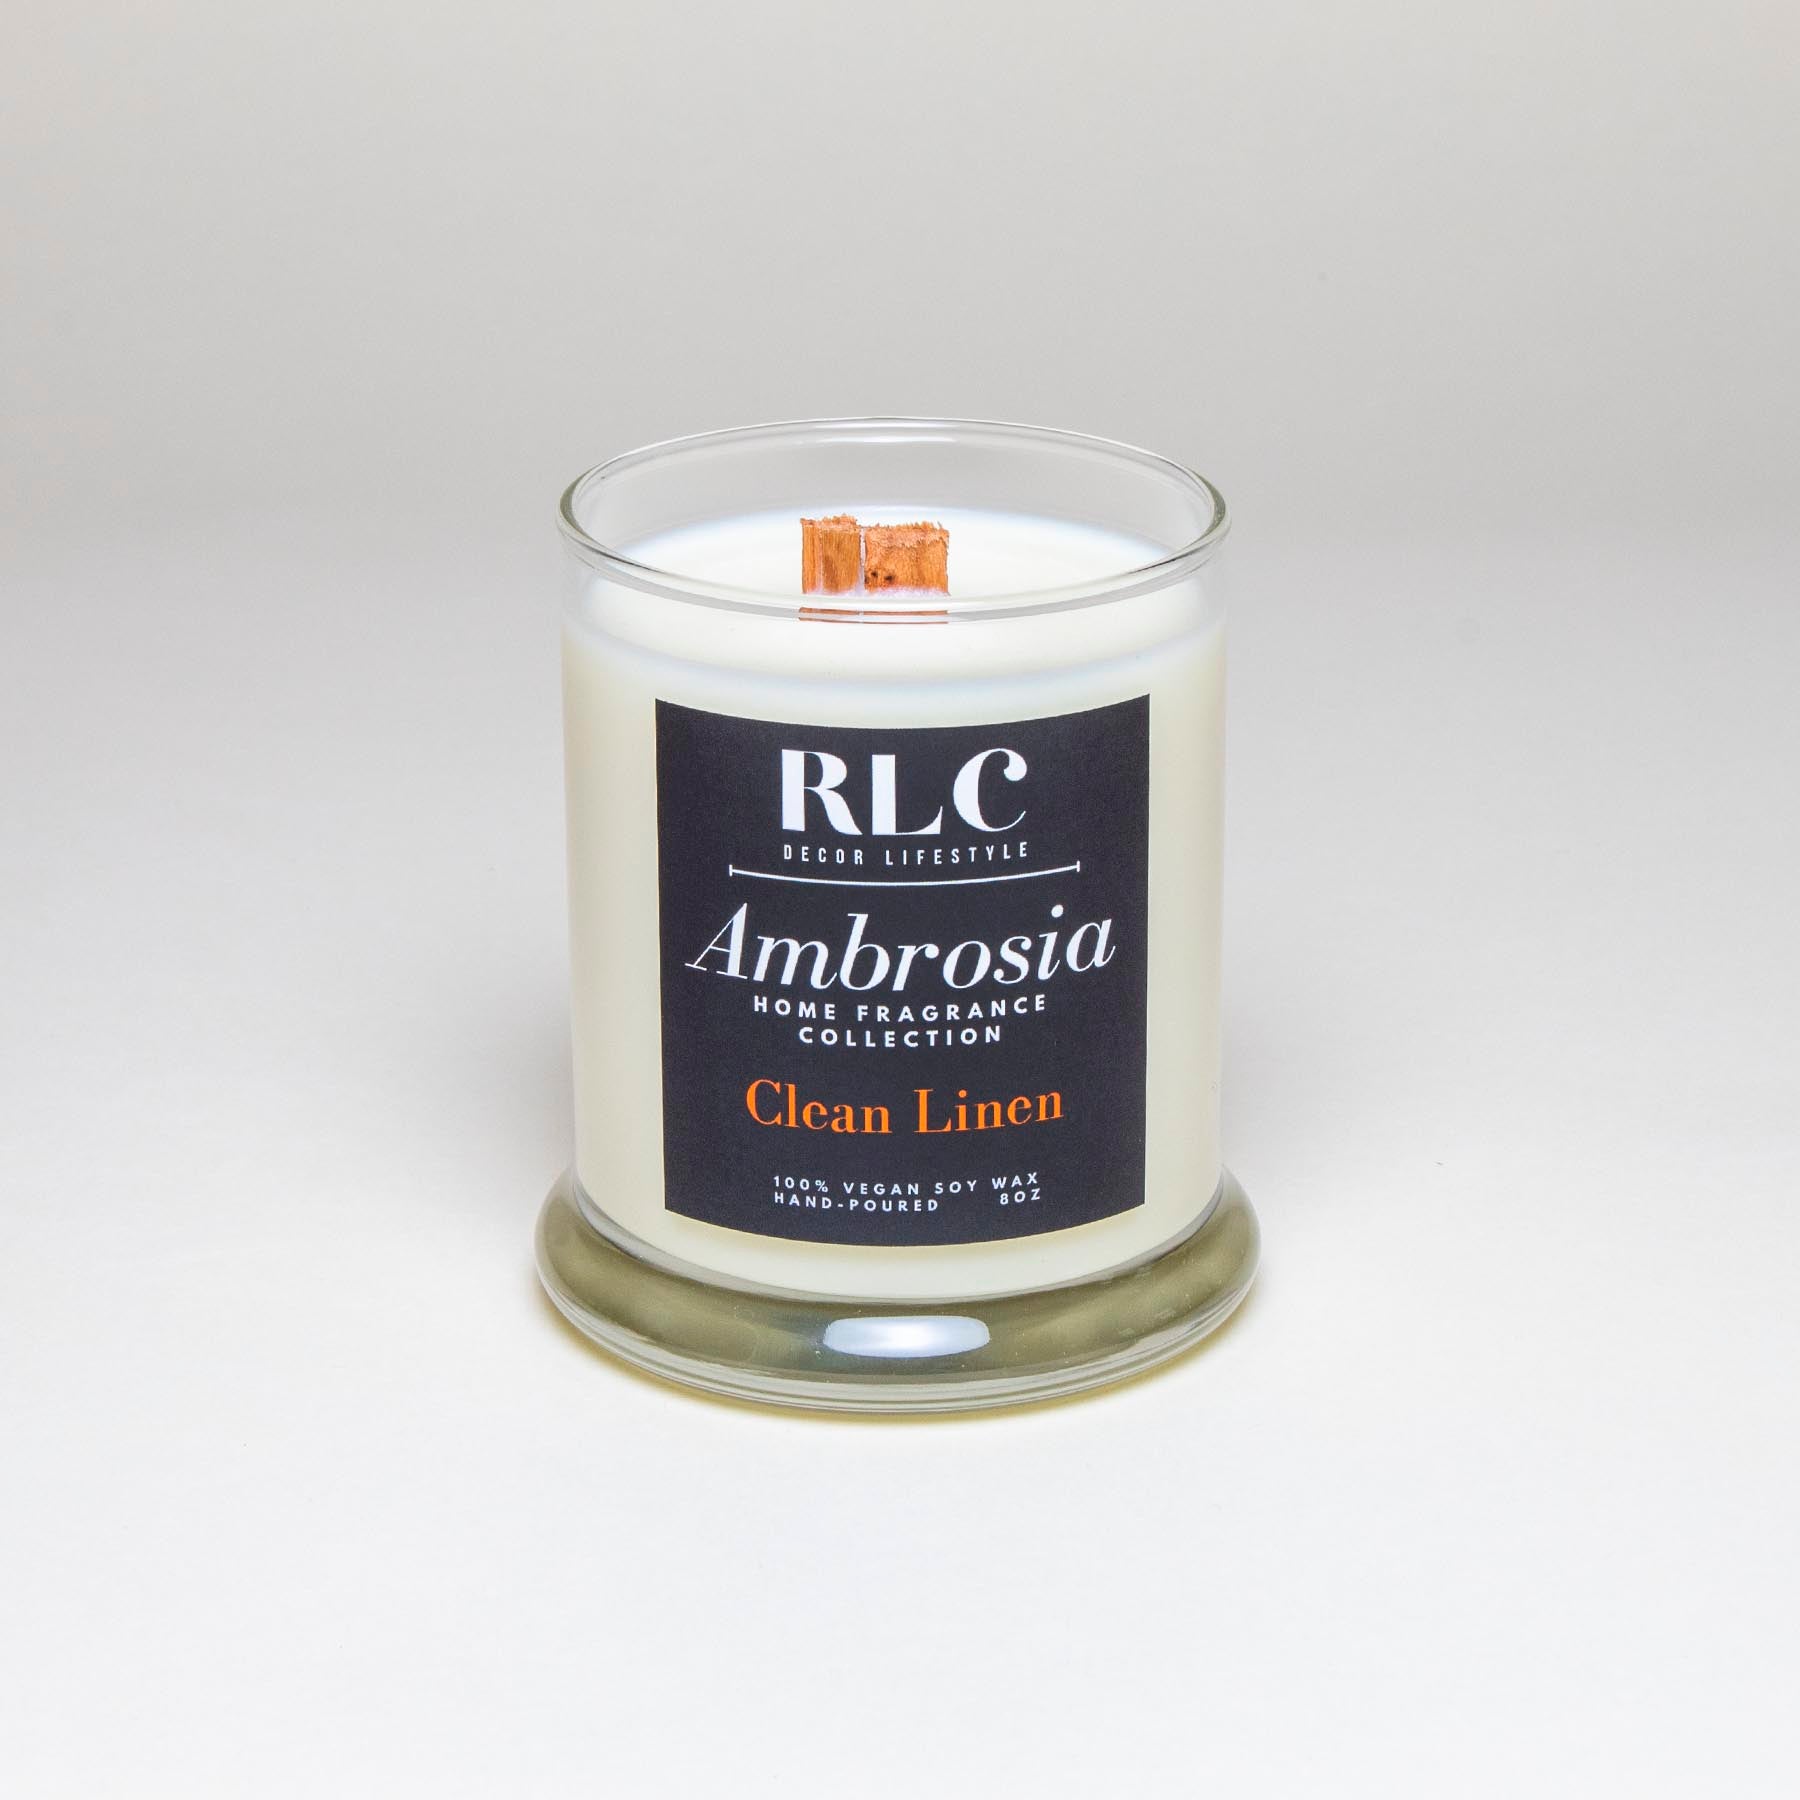 RLC Decor Lifestyle - Ambrosia Collection - Vegan Soy Clean Linen Candle - A Chicago-based lifestyle brand. We provide 100% Handpoured Vegan Soy Candles for home & small office, travel candles, home decor, and jewelry. 